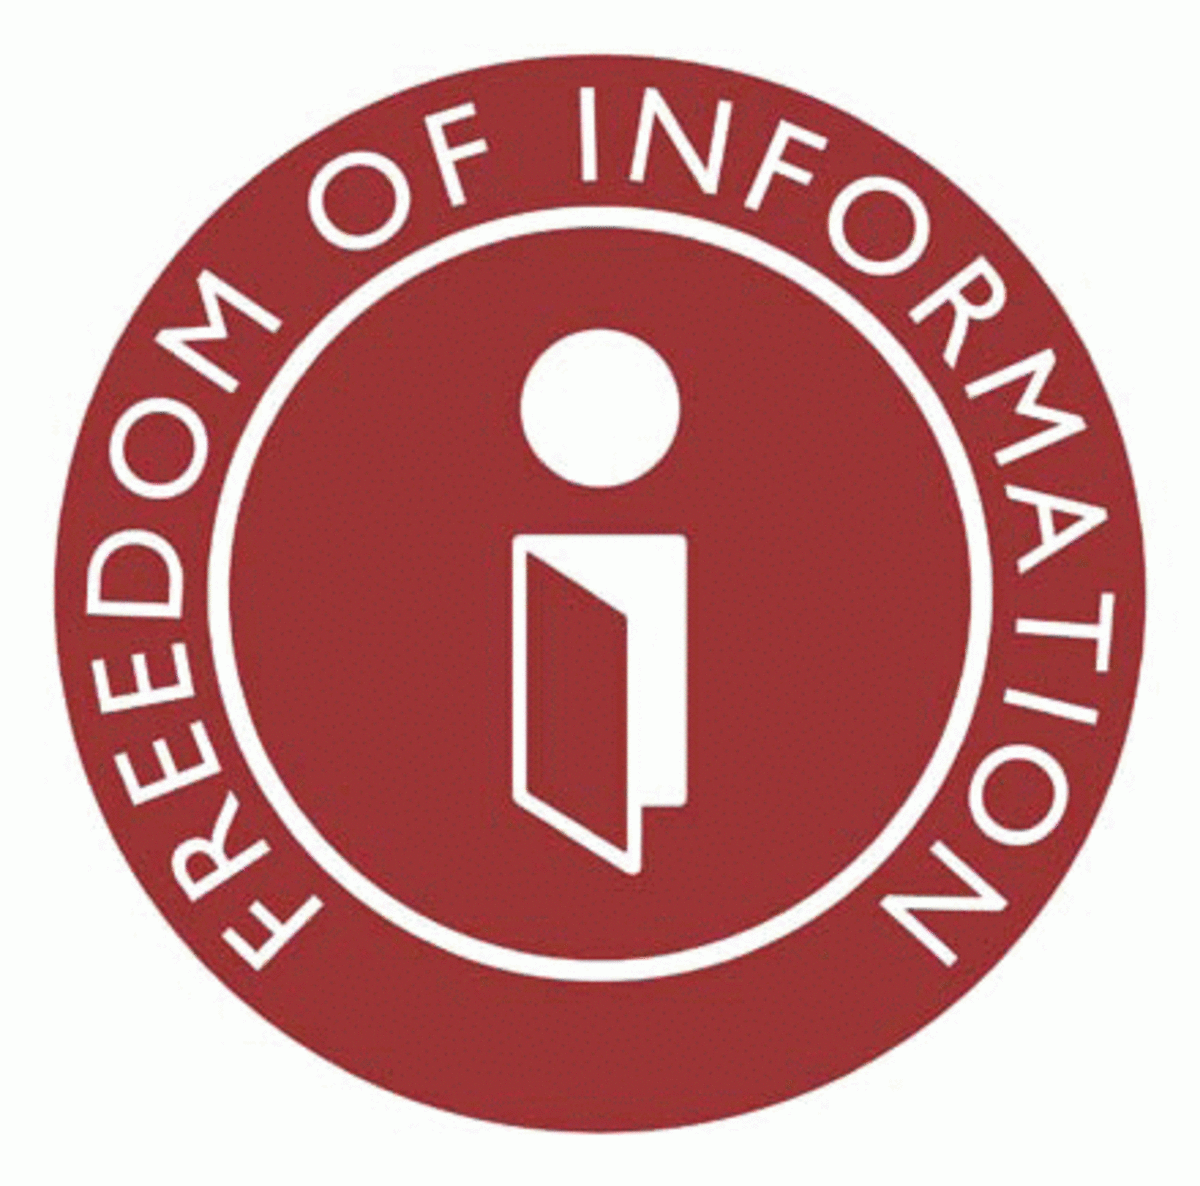 Freedom of Information Act in the Philippines